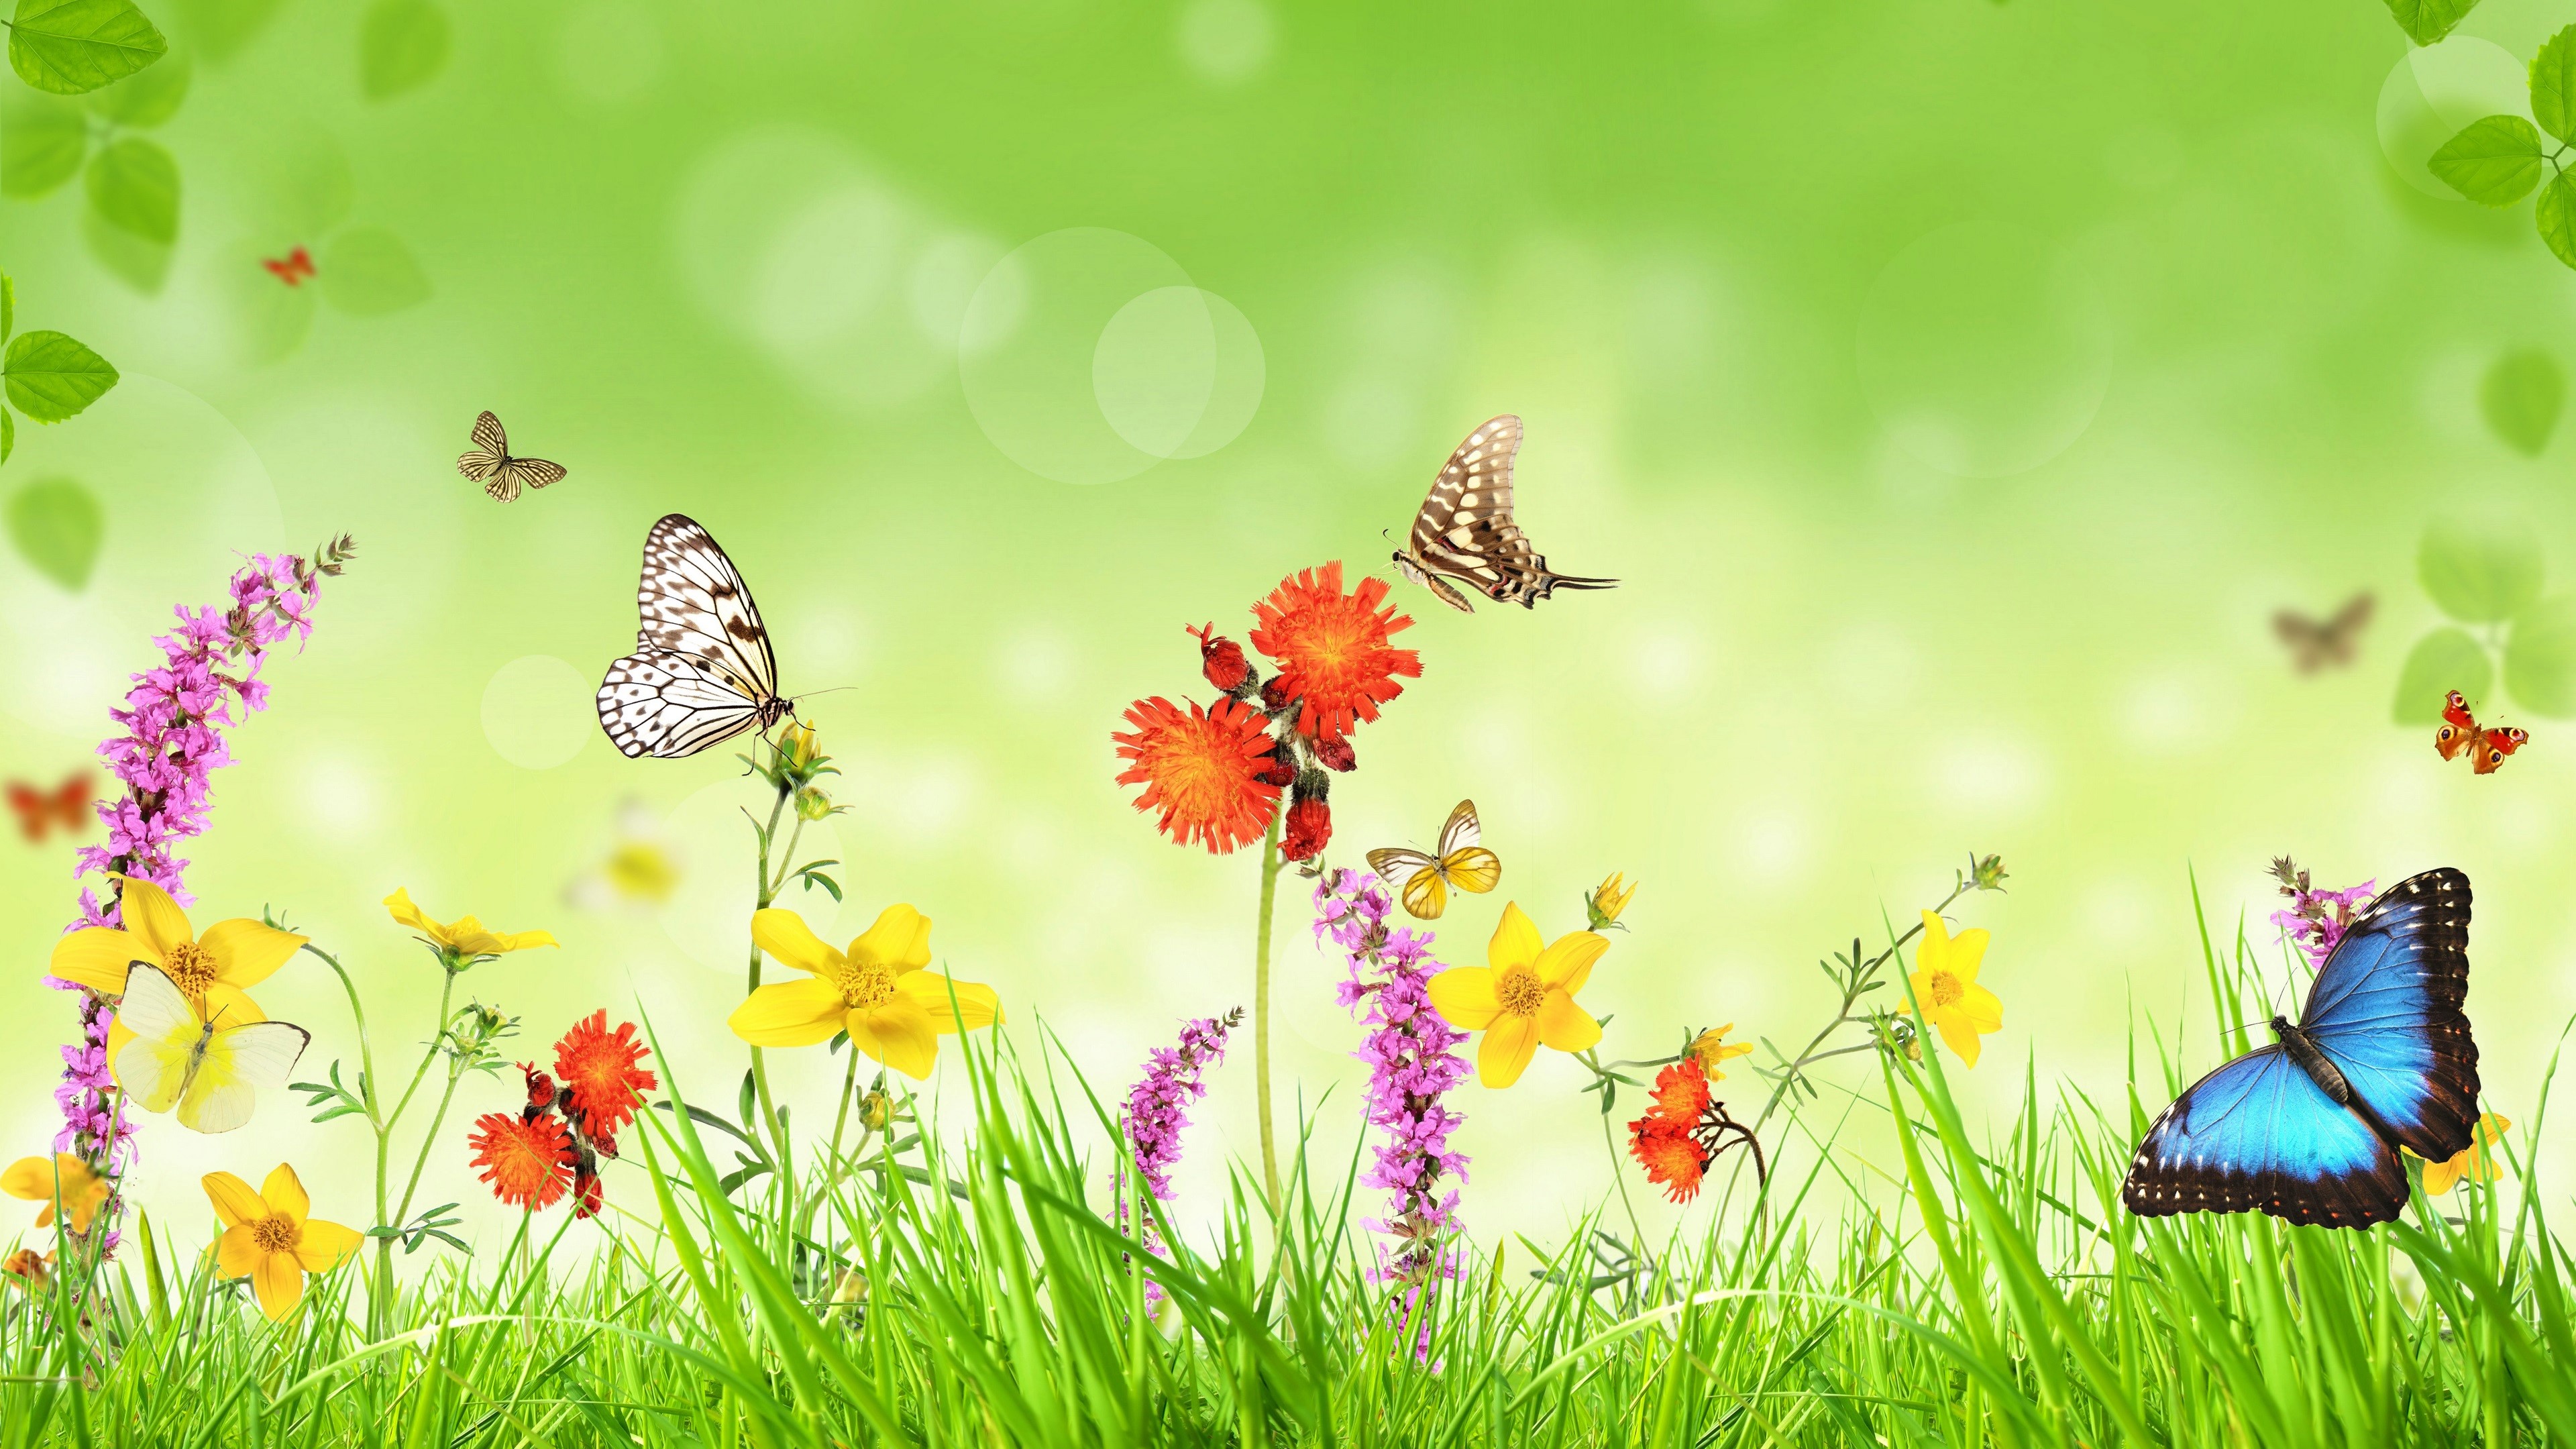 Artistic Butterfly Colorful Flower Grass Spring 3840x2160